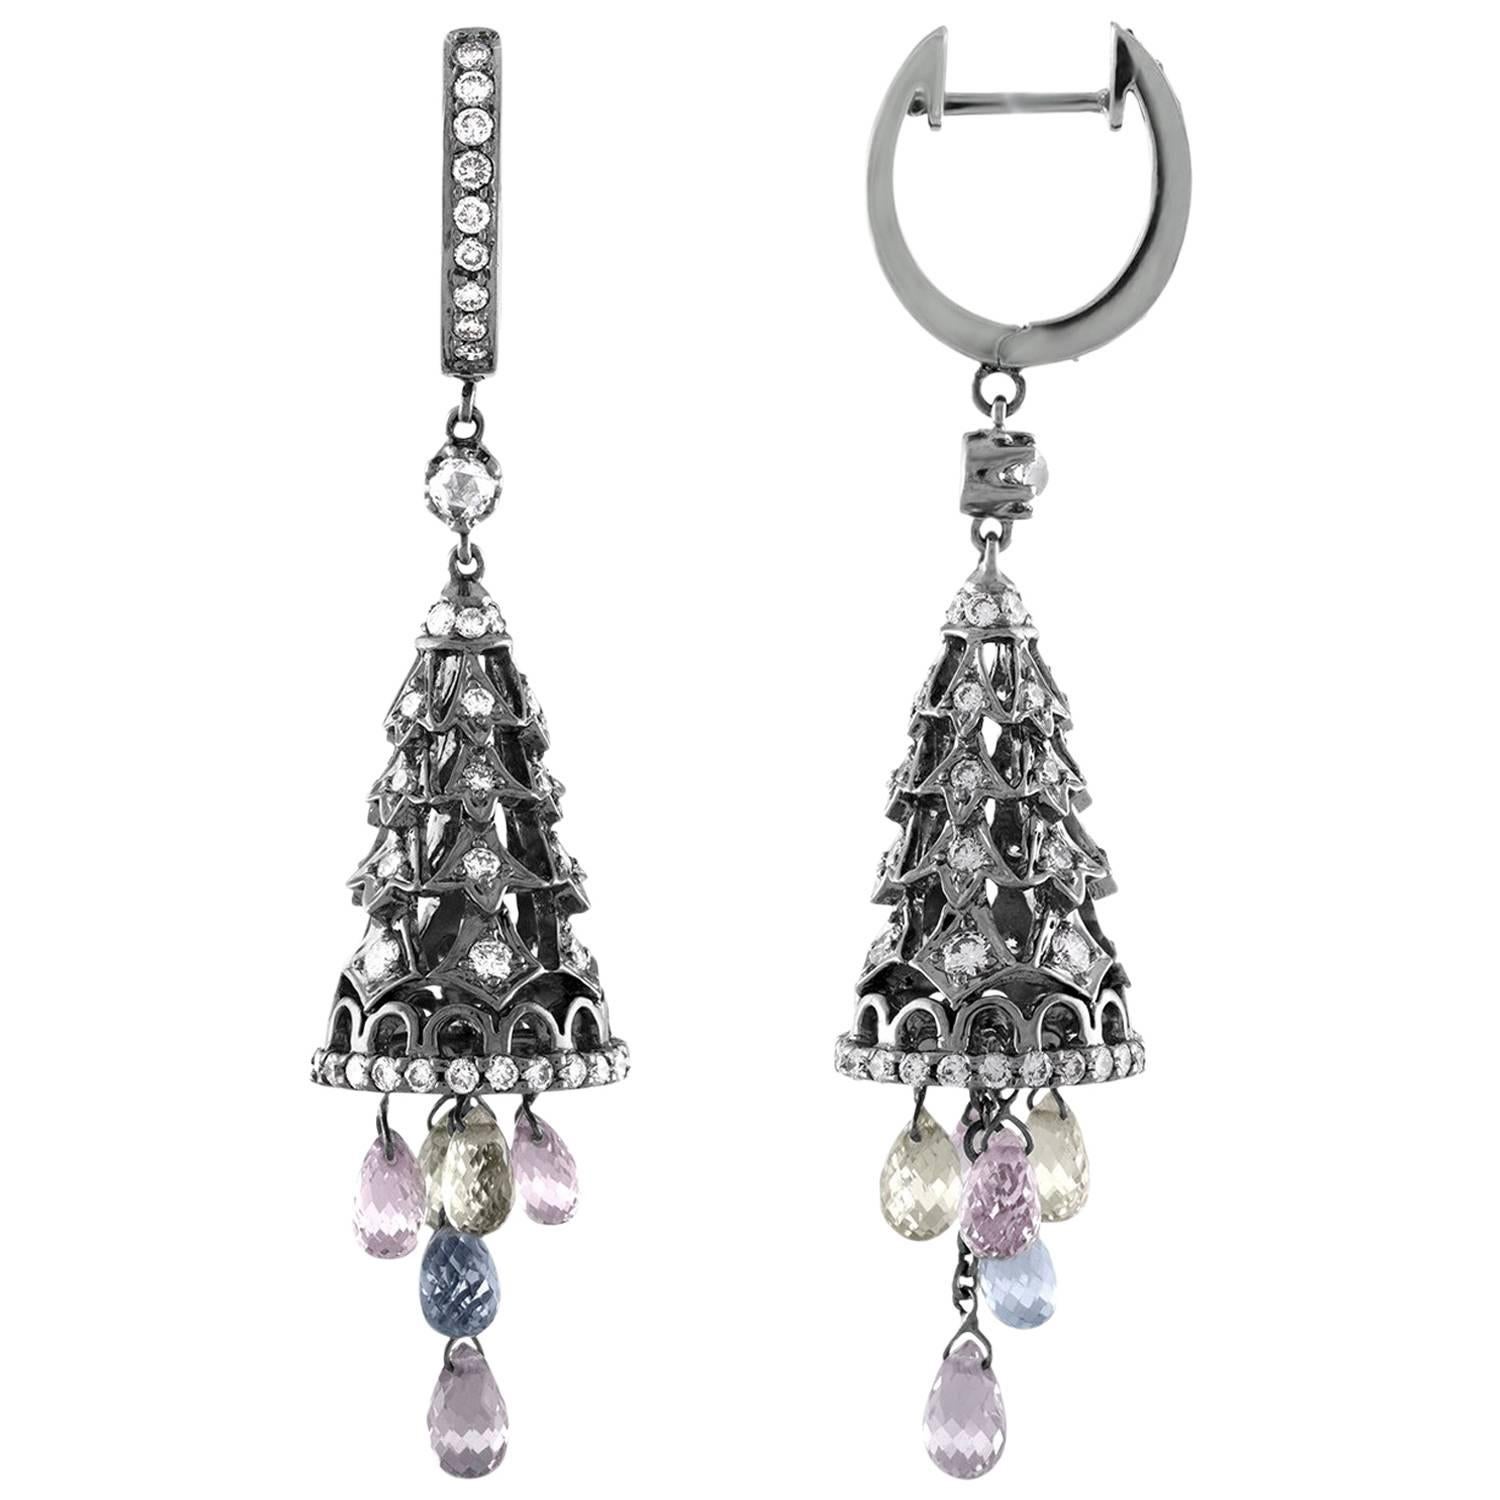 1.42 Carat Diamonds with Dangling Sapphire Briolettes Gold Earrings